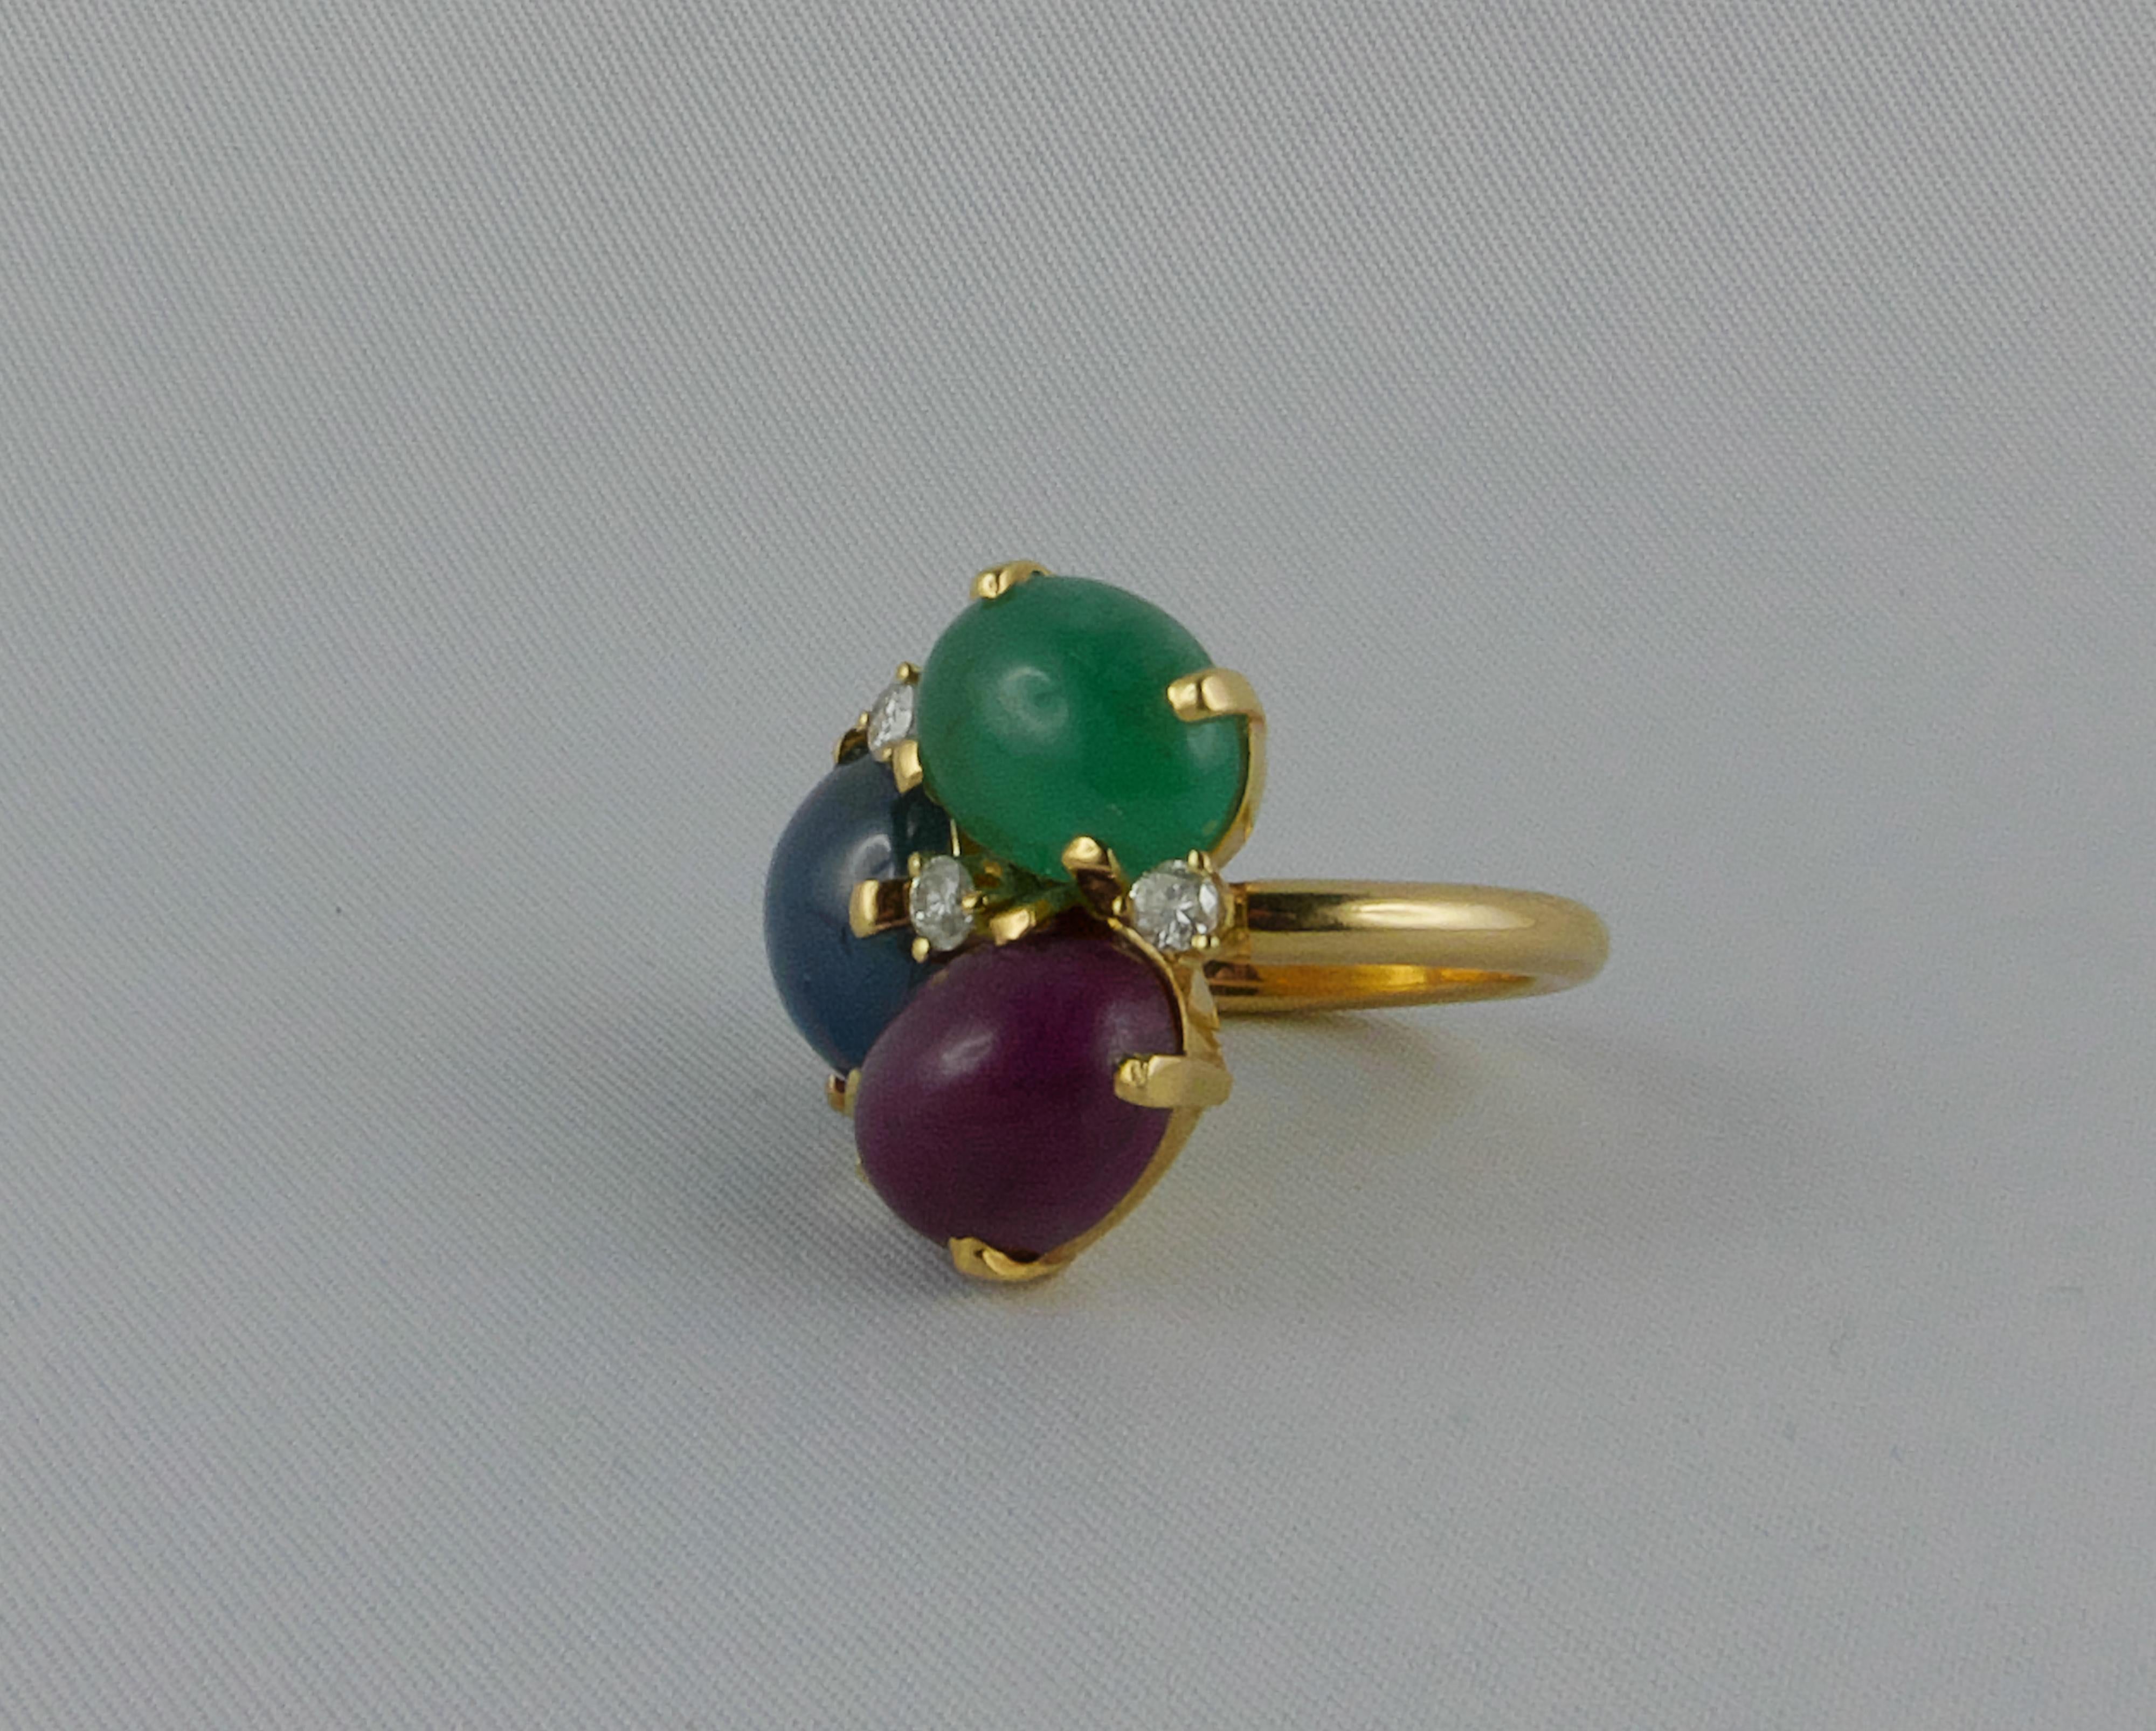 Glamourous Tutti Frutti Ring in Yellow Gold with 3 cabochon cut gems: Ruby, Sapphire and Emerald. The three gorgeous gems are set with 18k Yellow Gold and Diamonds to give sparkle and an extremely chic and sophisticated look. 
This delightful